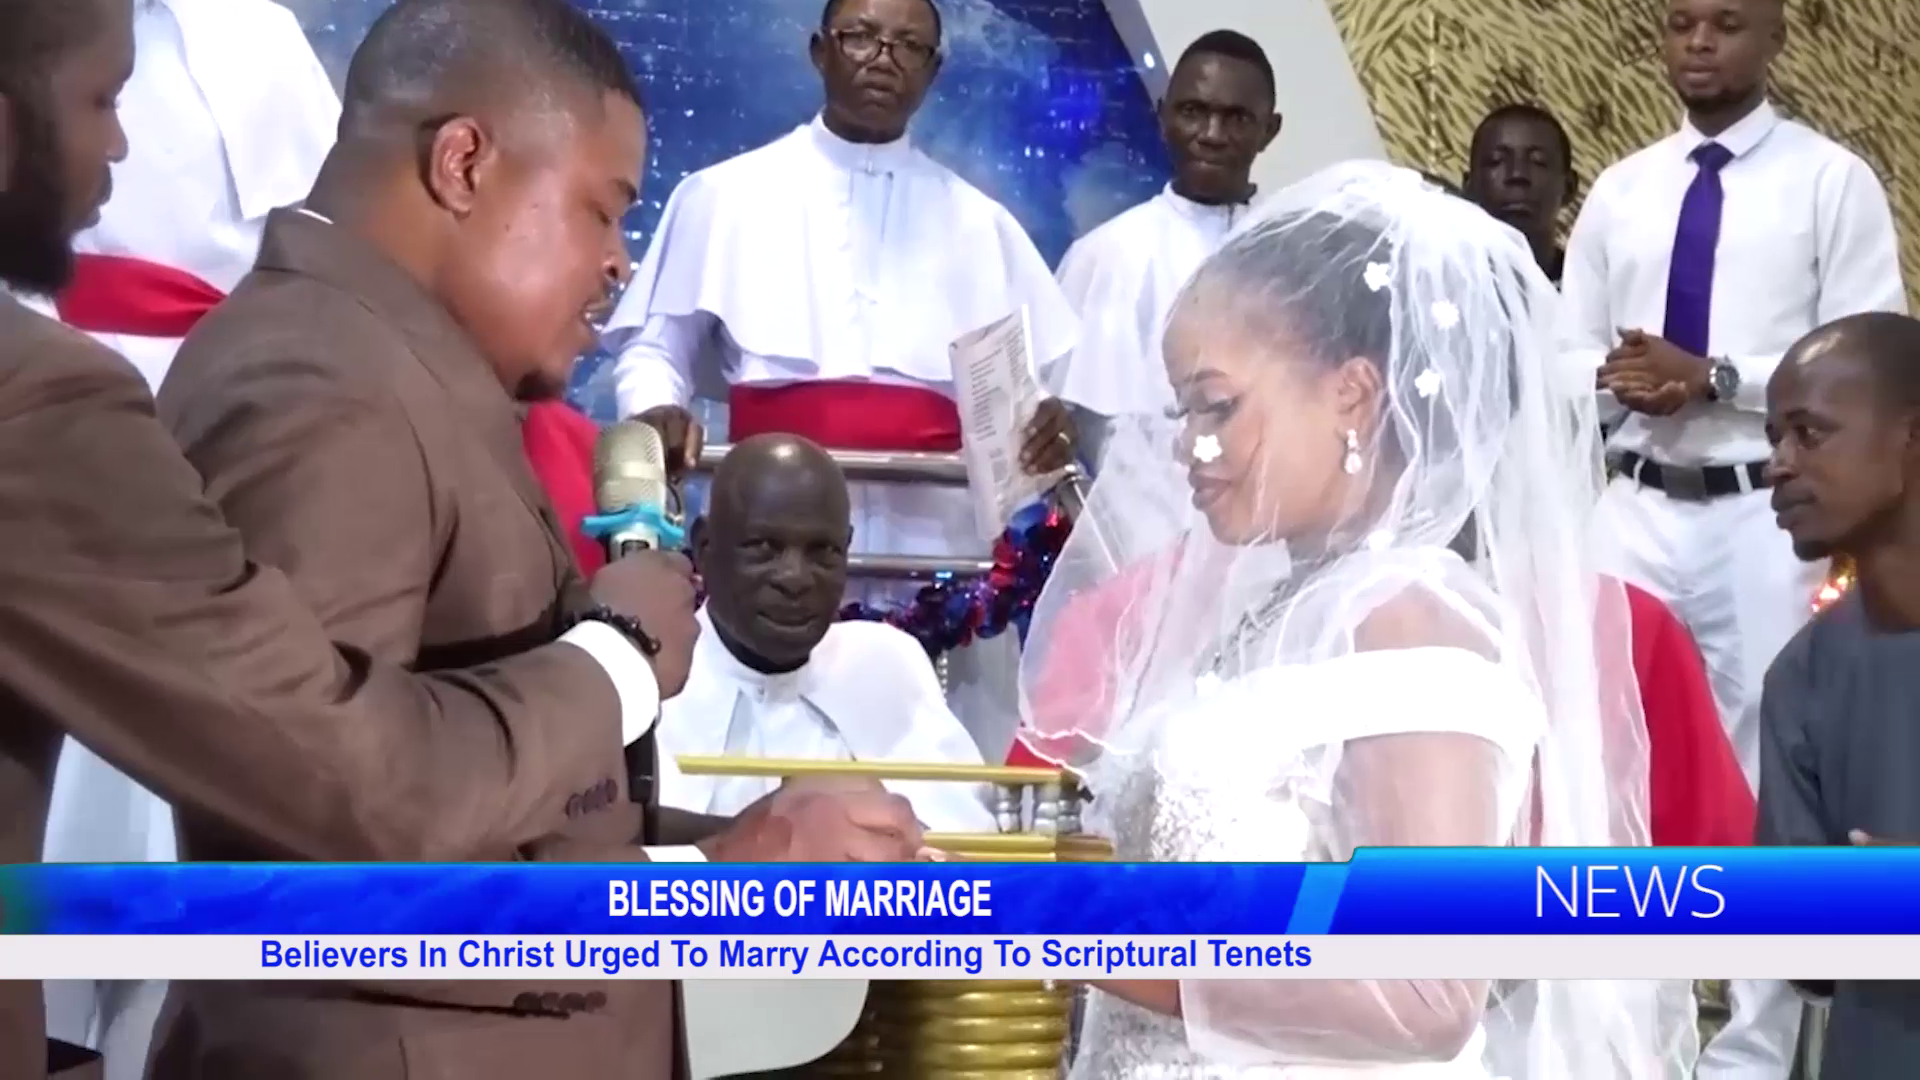 Blessing Of Marriage: Believers In Christ Urged To Marry According To Scriptural Tenets